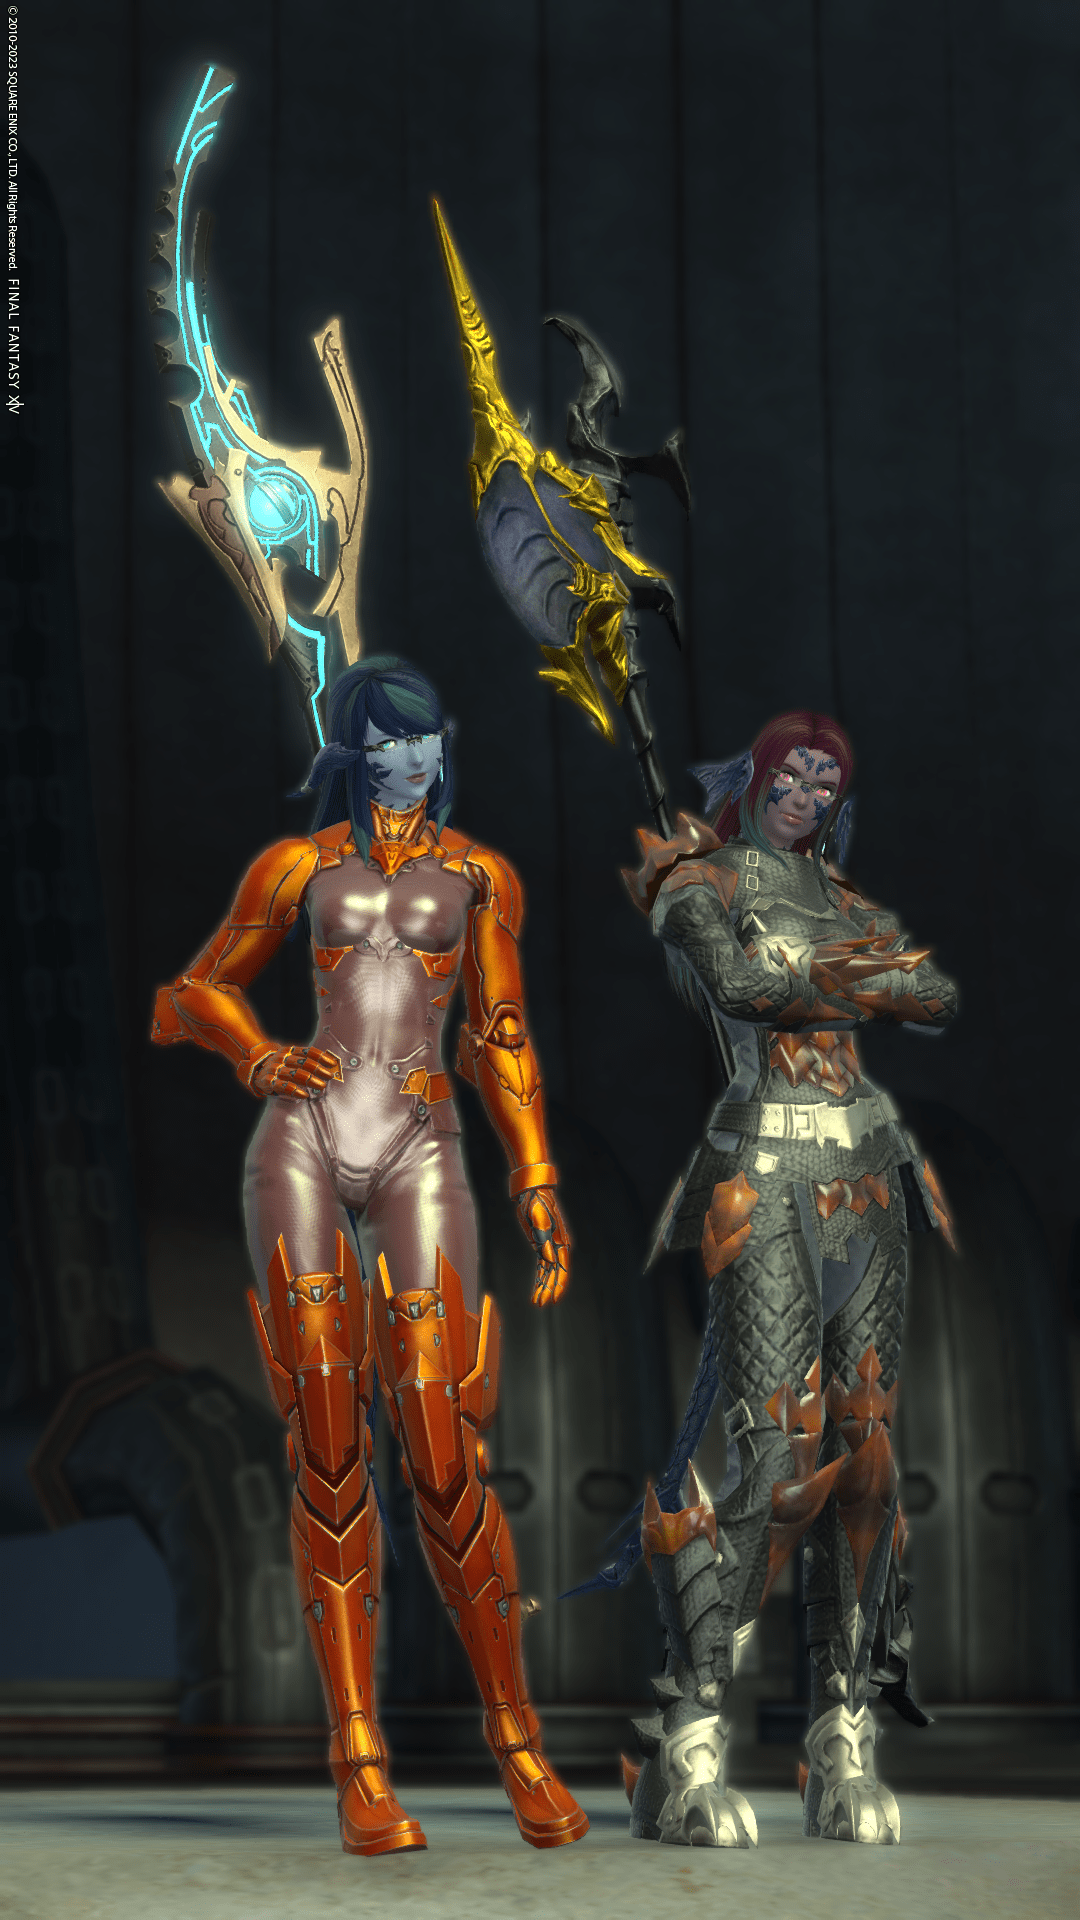 Lizicus & Laureine, both Au Ra's from Final Fantasy XIV as Dragoons in their own way.